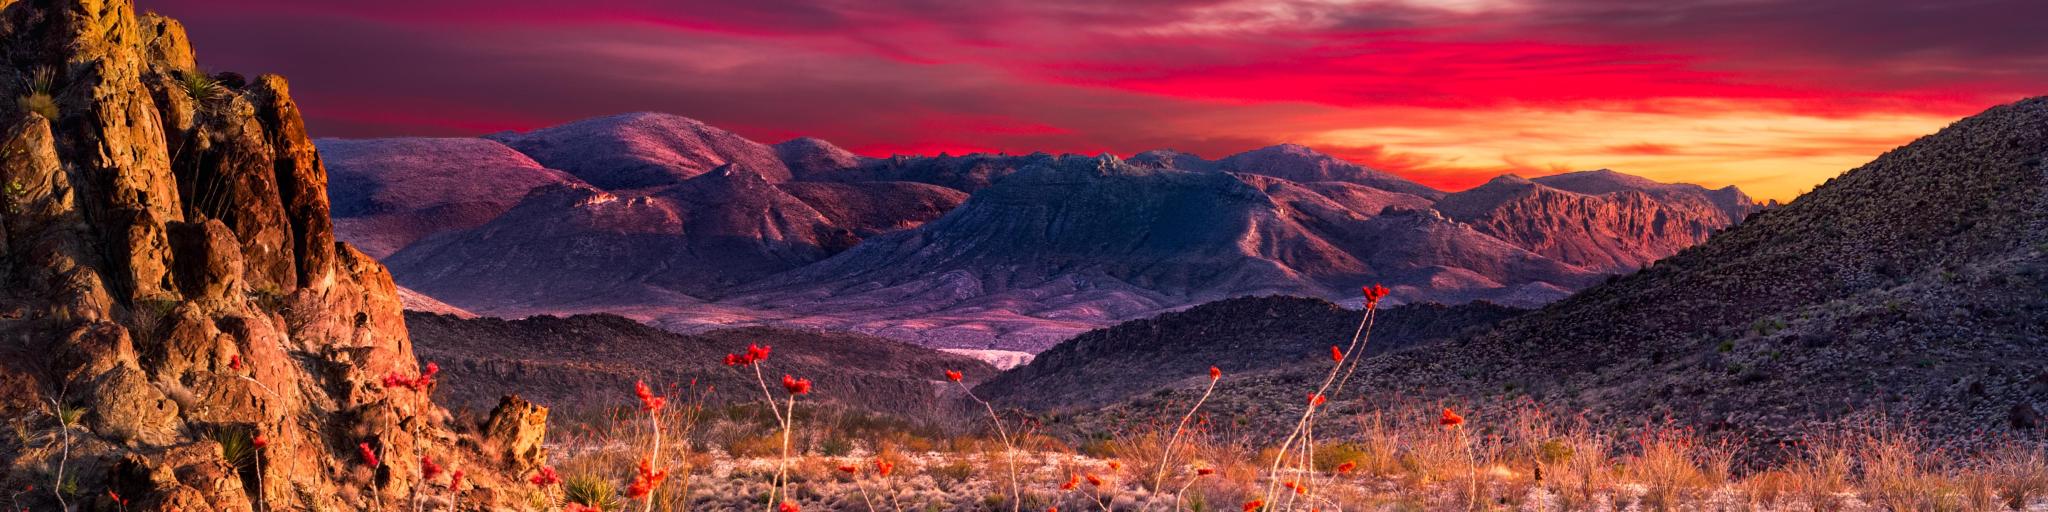 Mountains bathed in red and grey sunset light with red flowers in the foreground